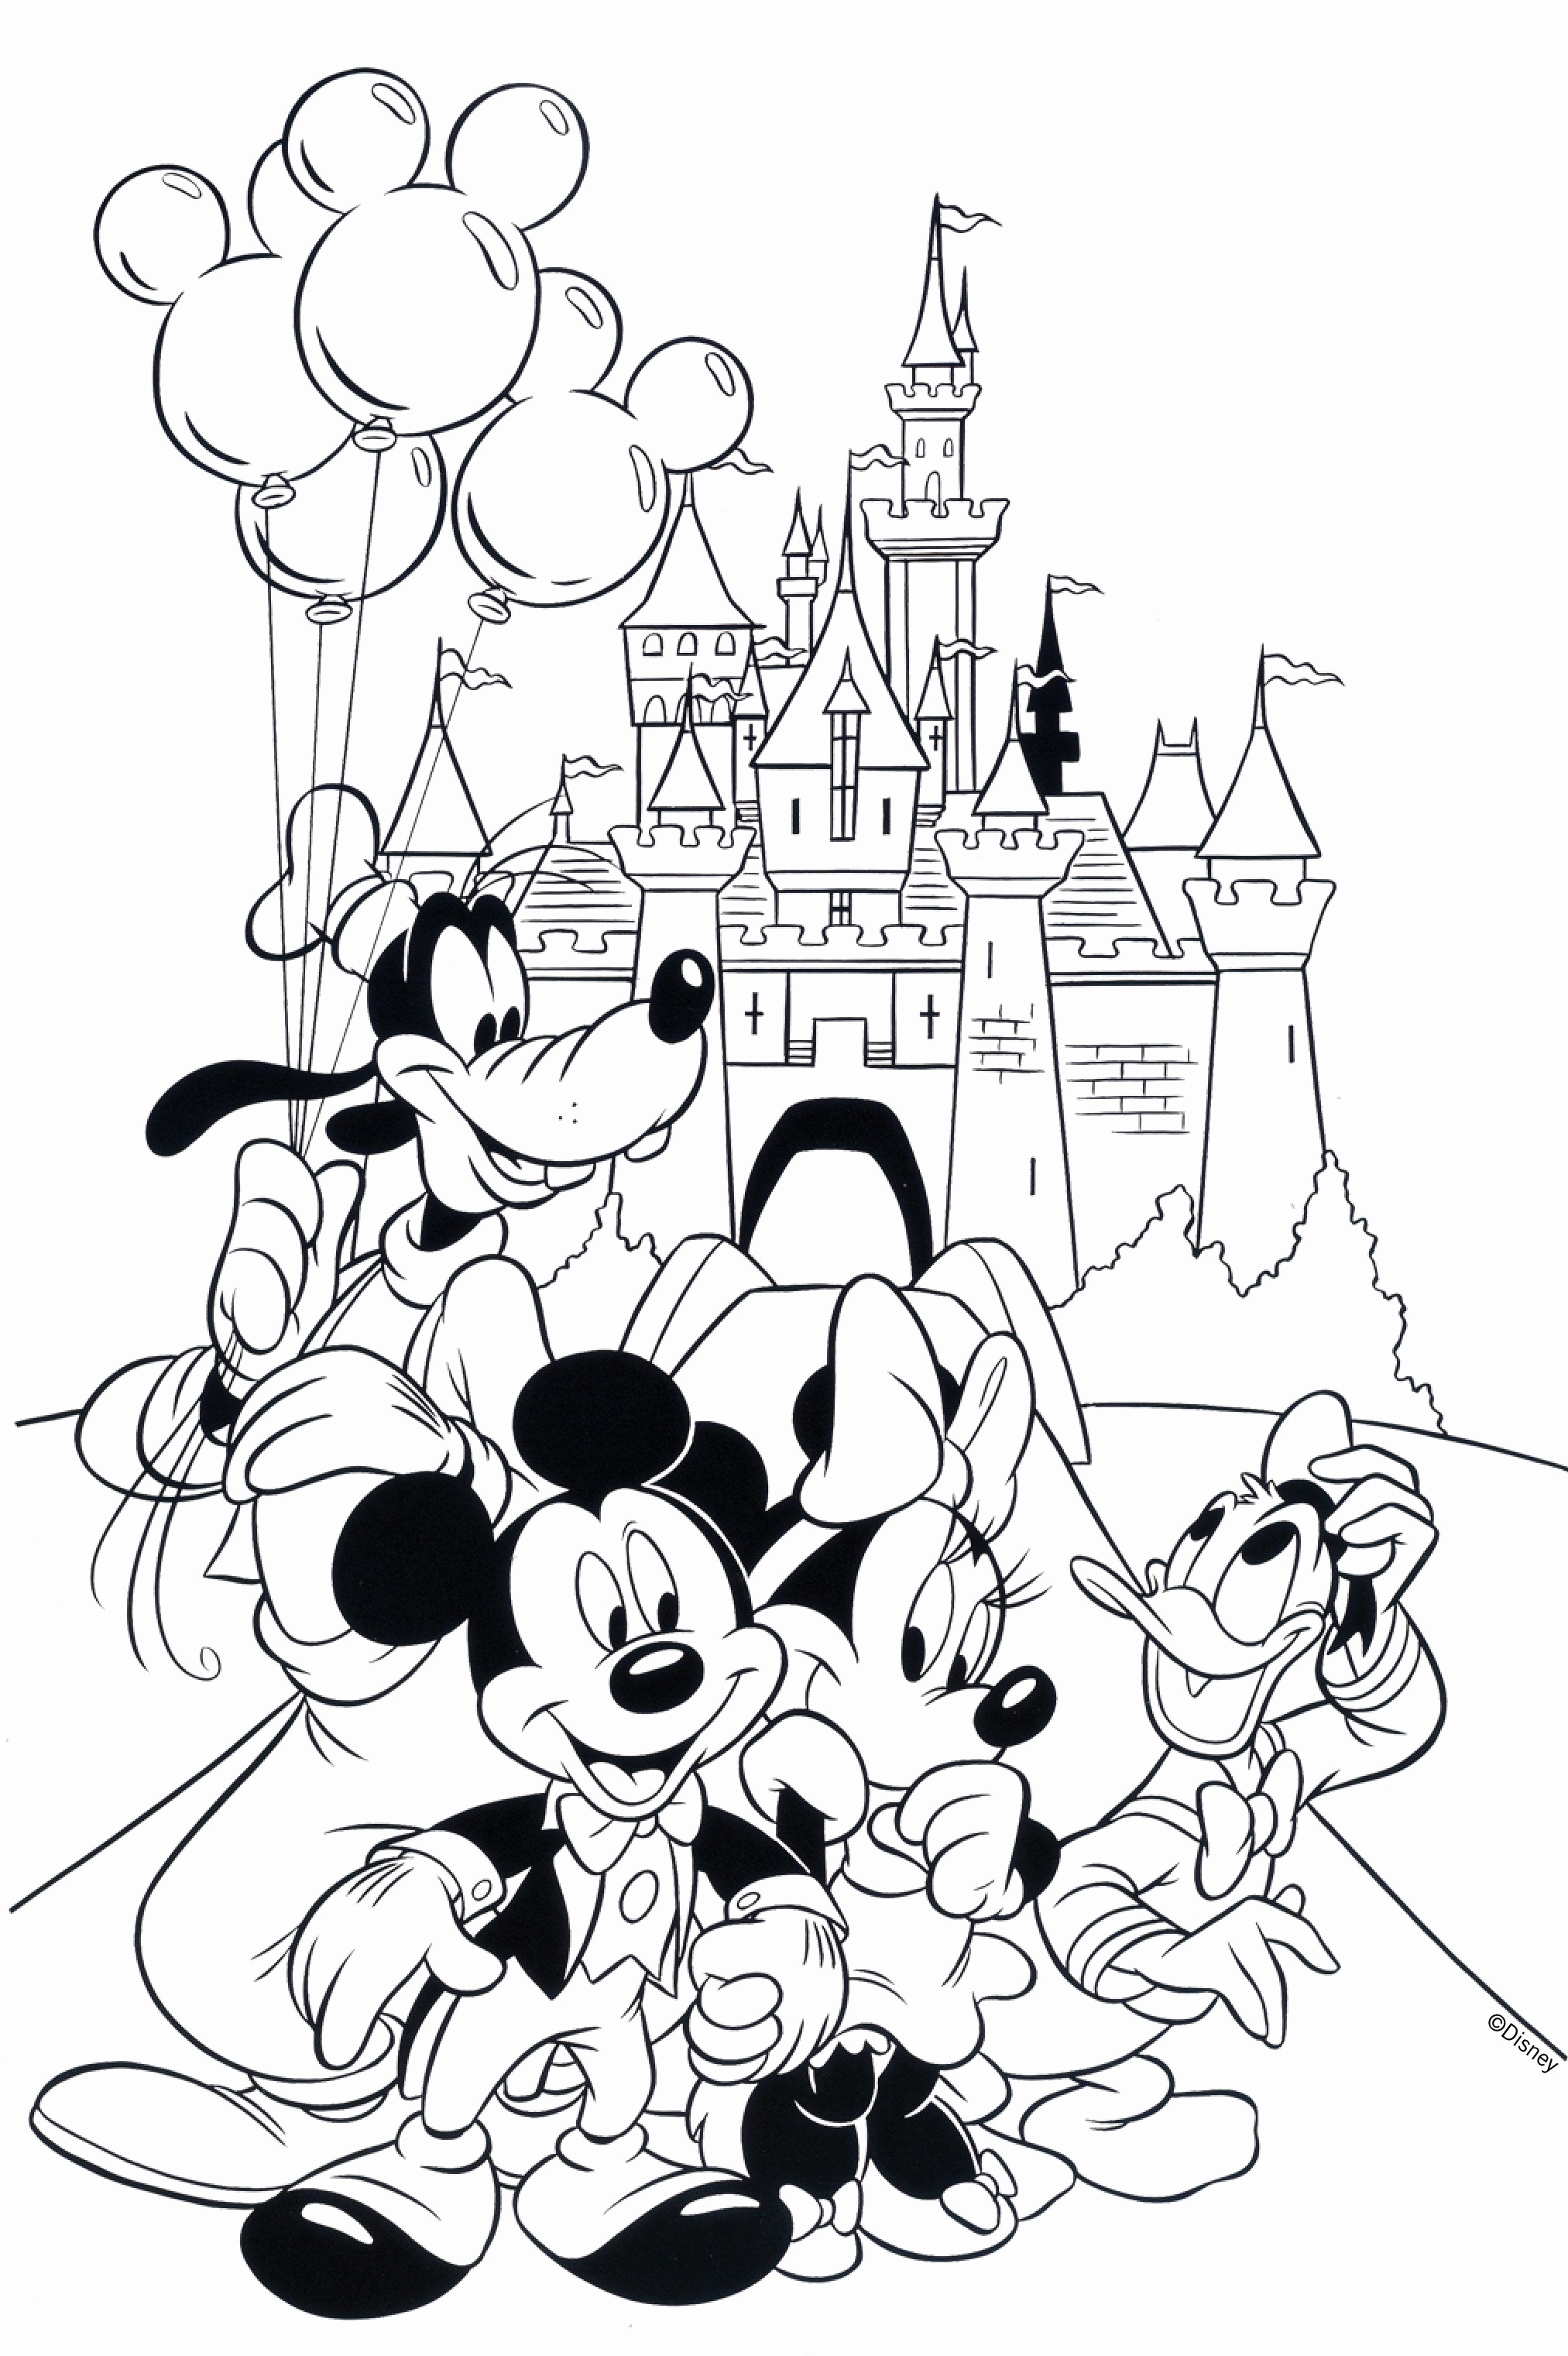 Disney Coloring Pages For Adults at GetDrawings | Free ...